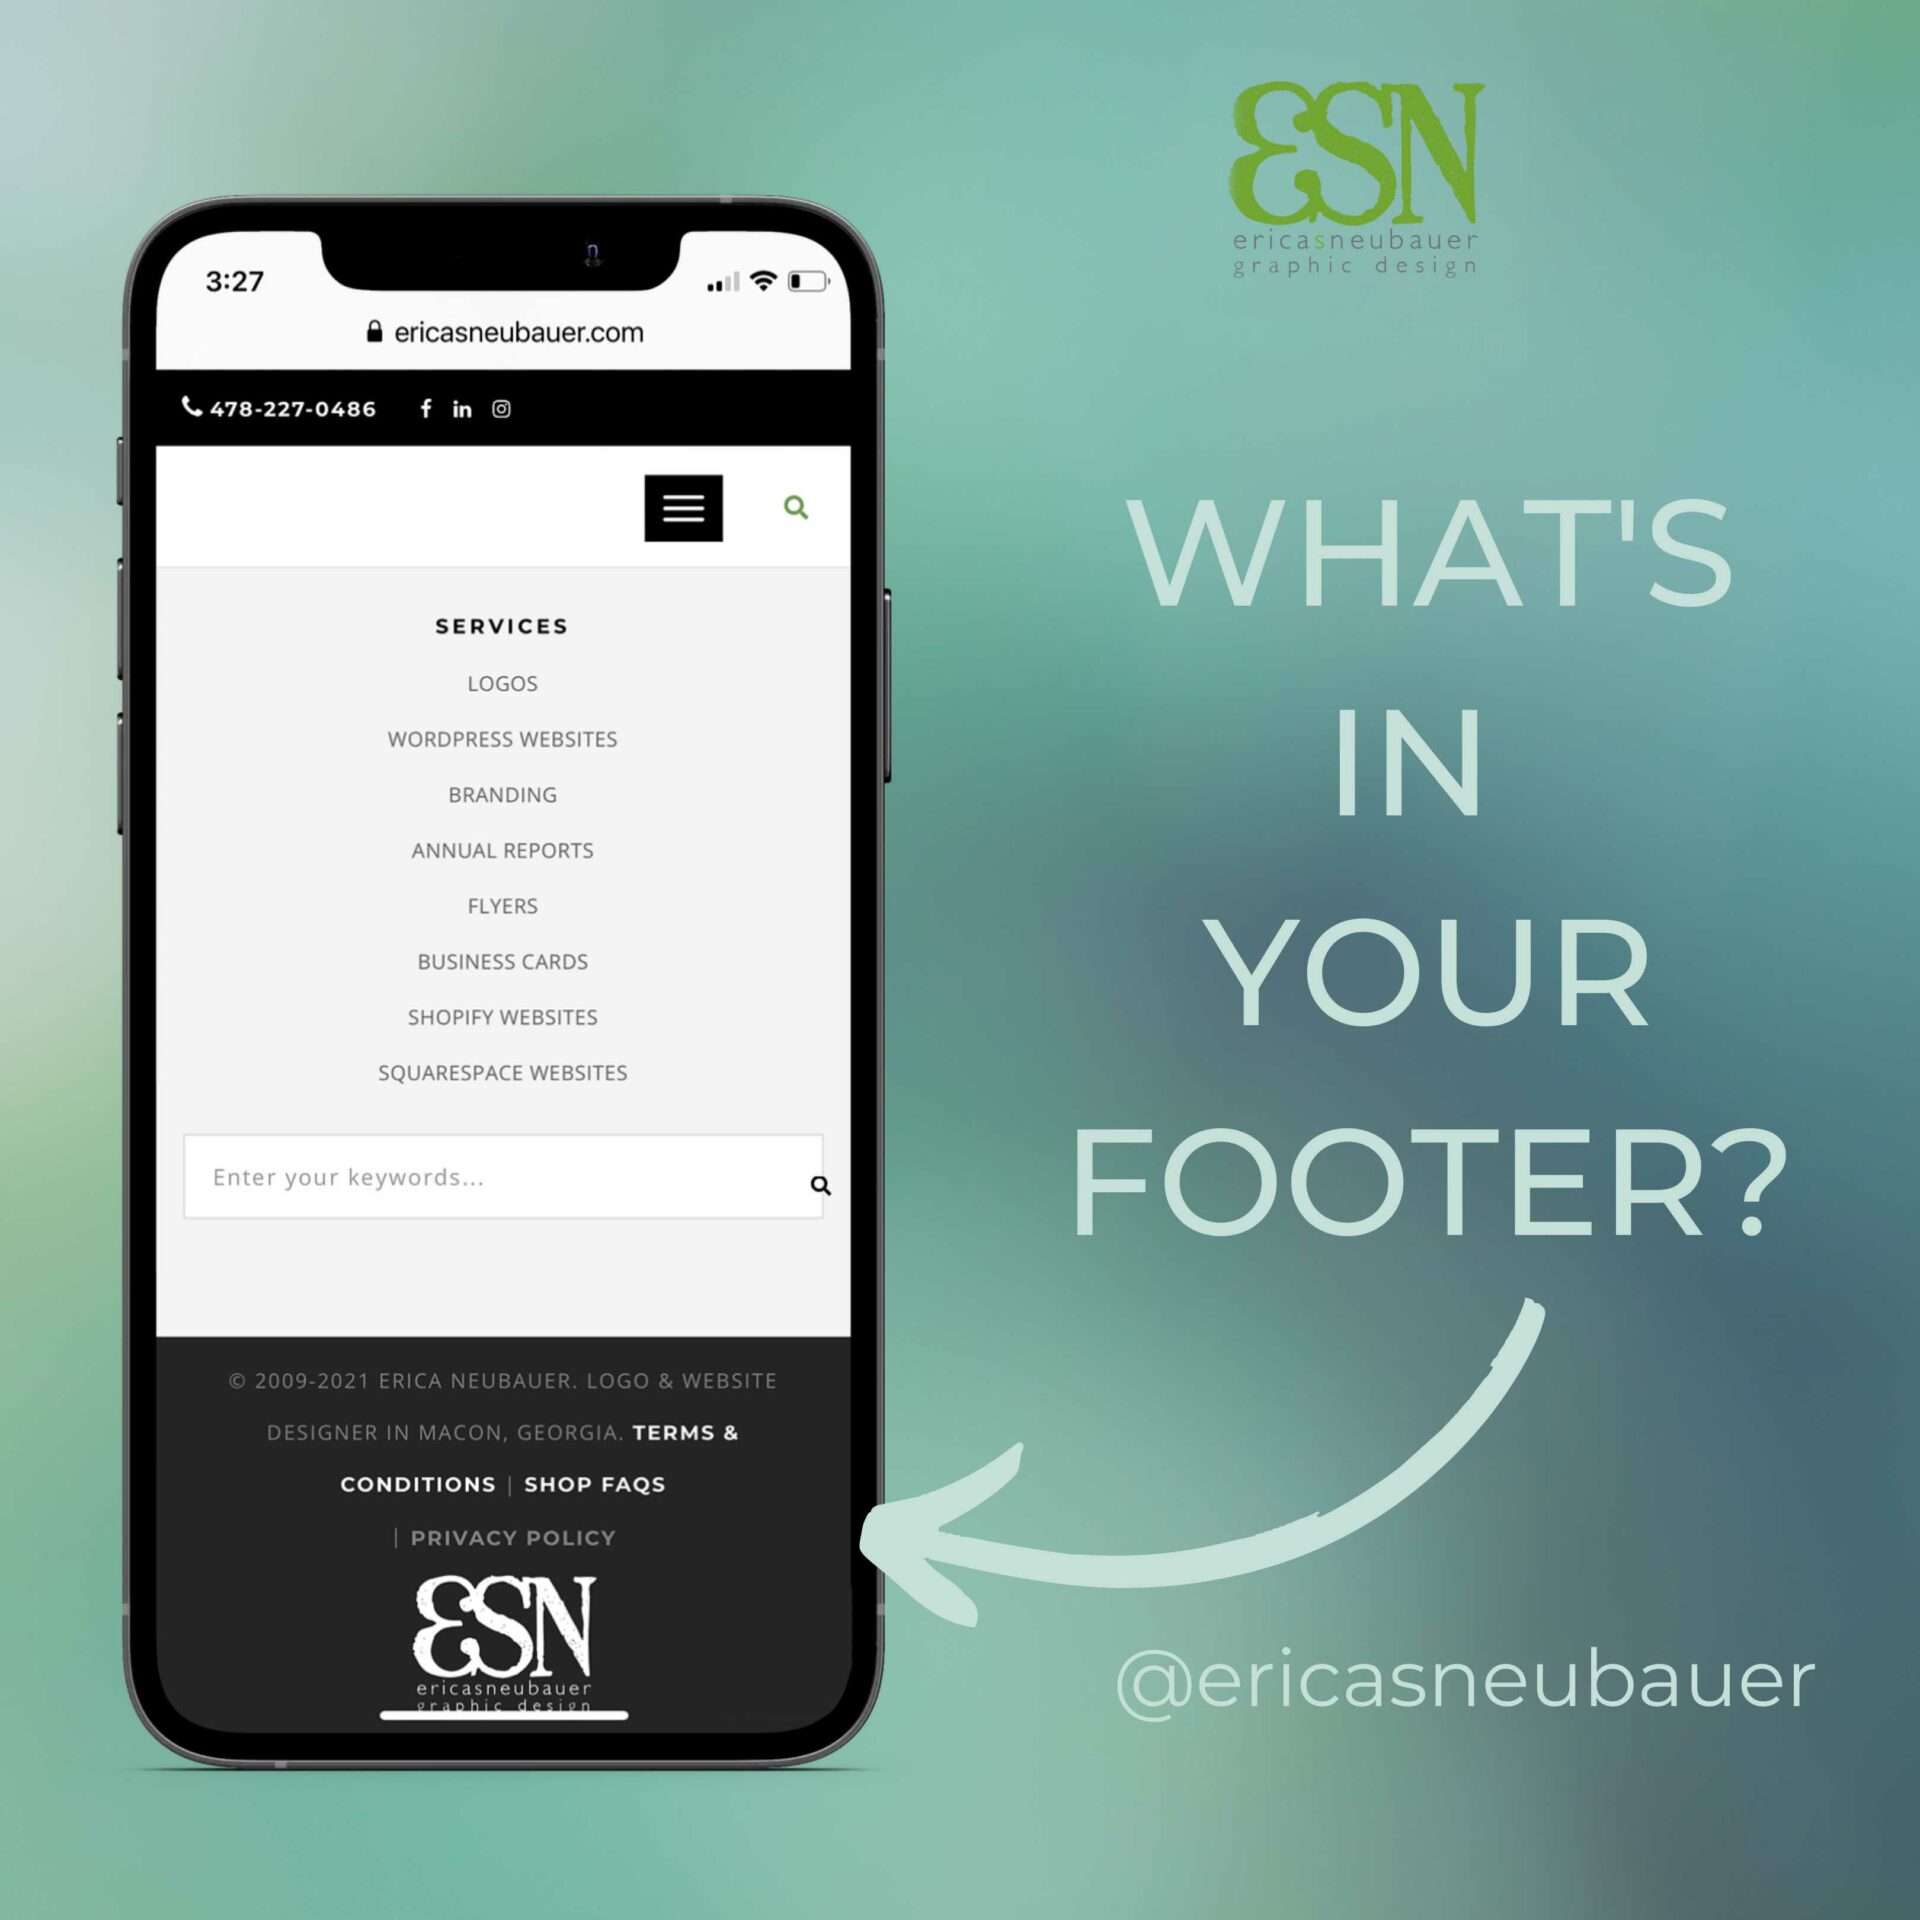 image of an iphone screen showing a website footer, with text "what's in your footer" and an arrow pointing to the footer